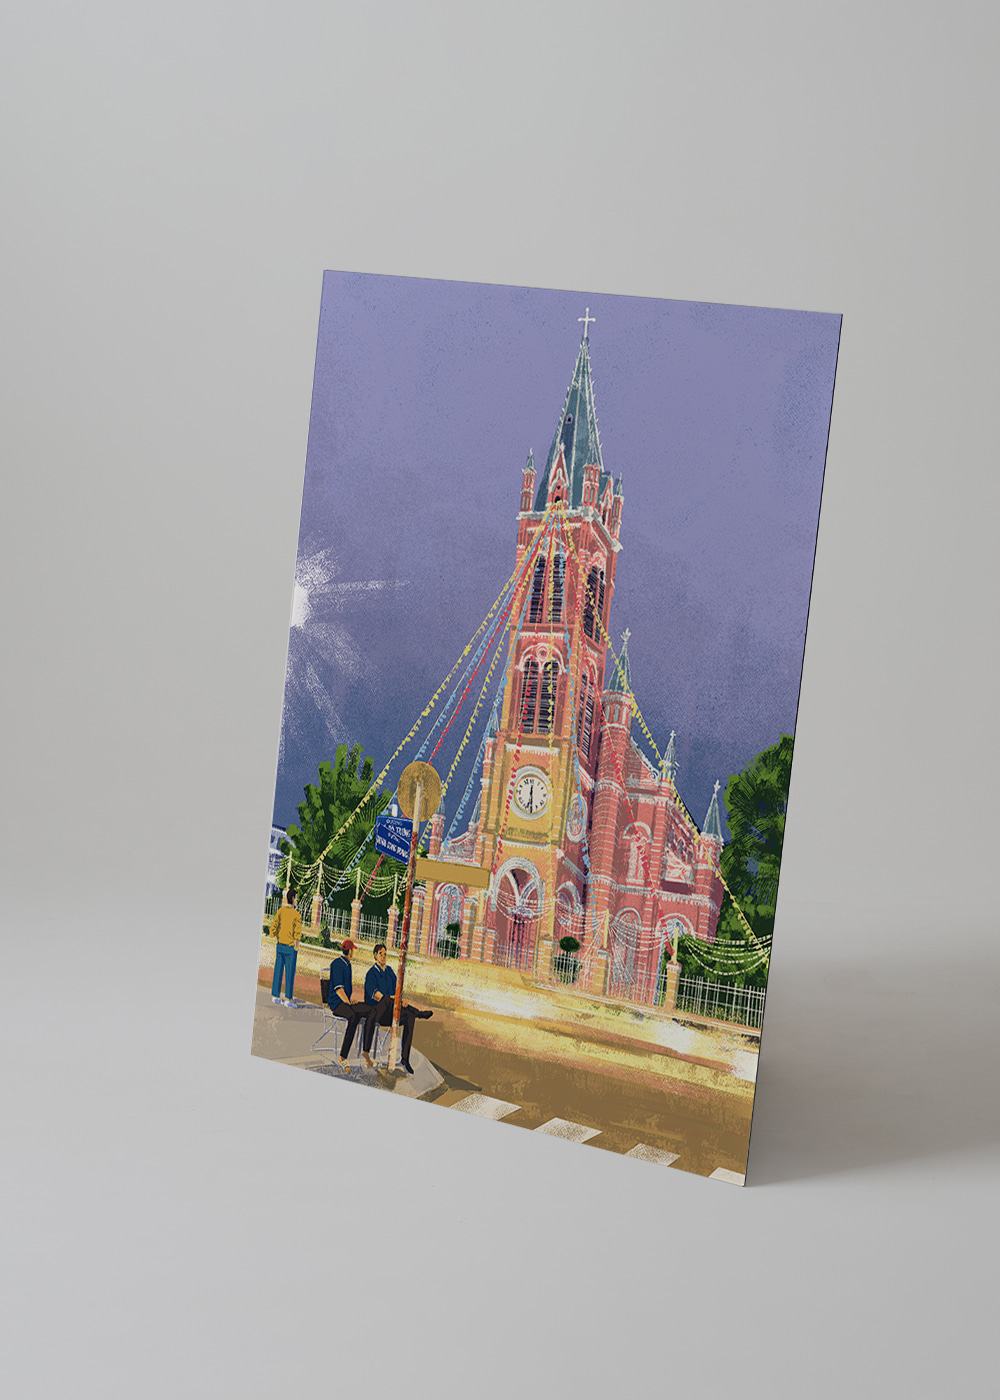 Across the Pink Church